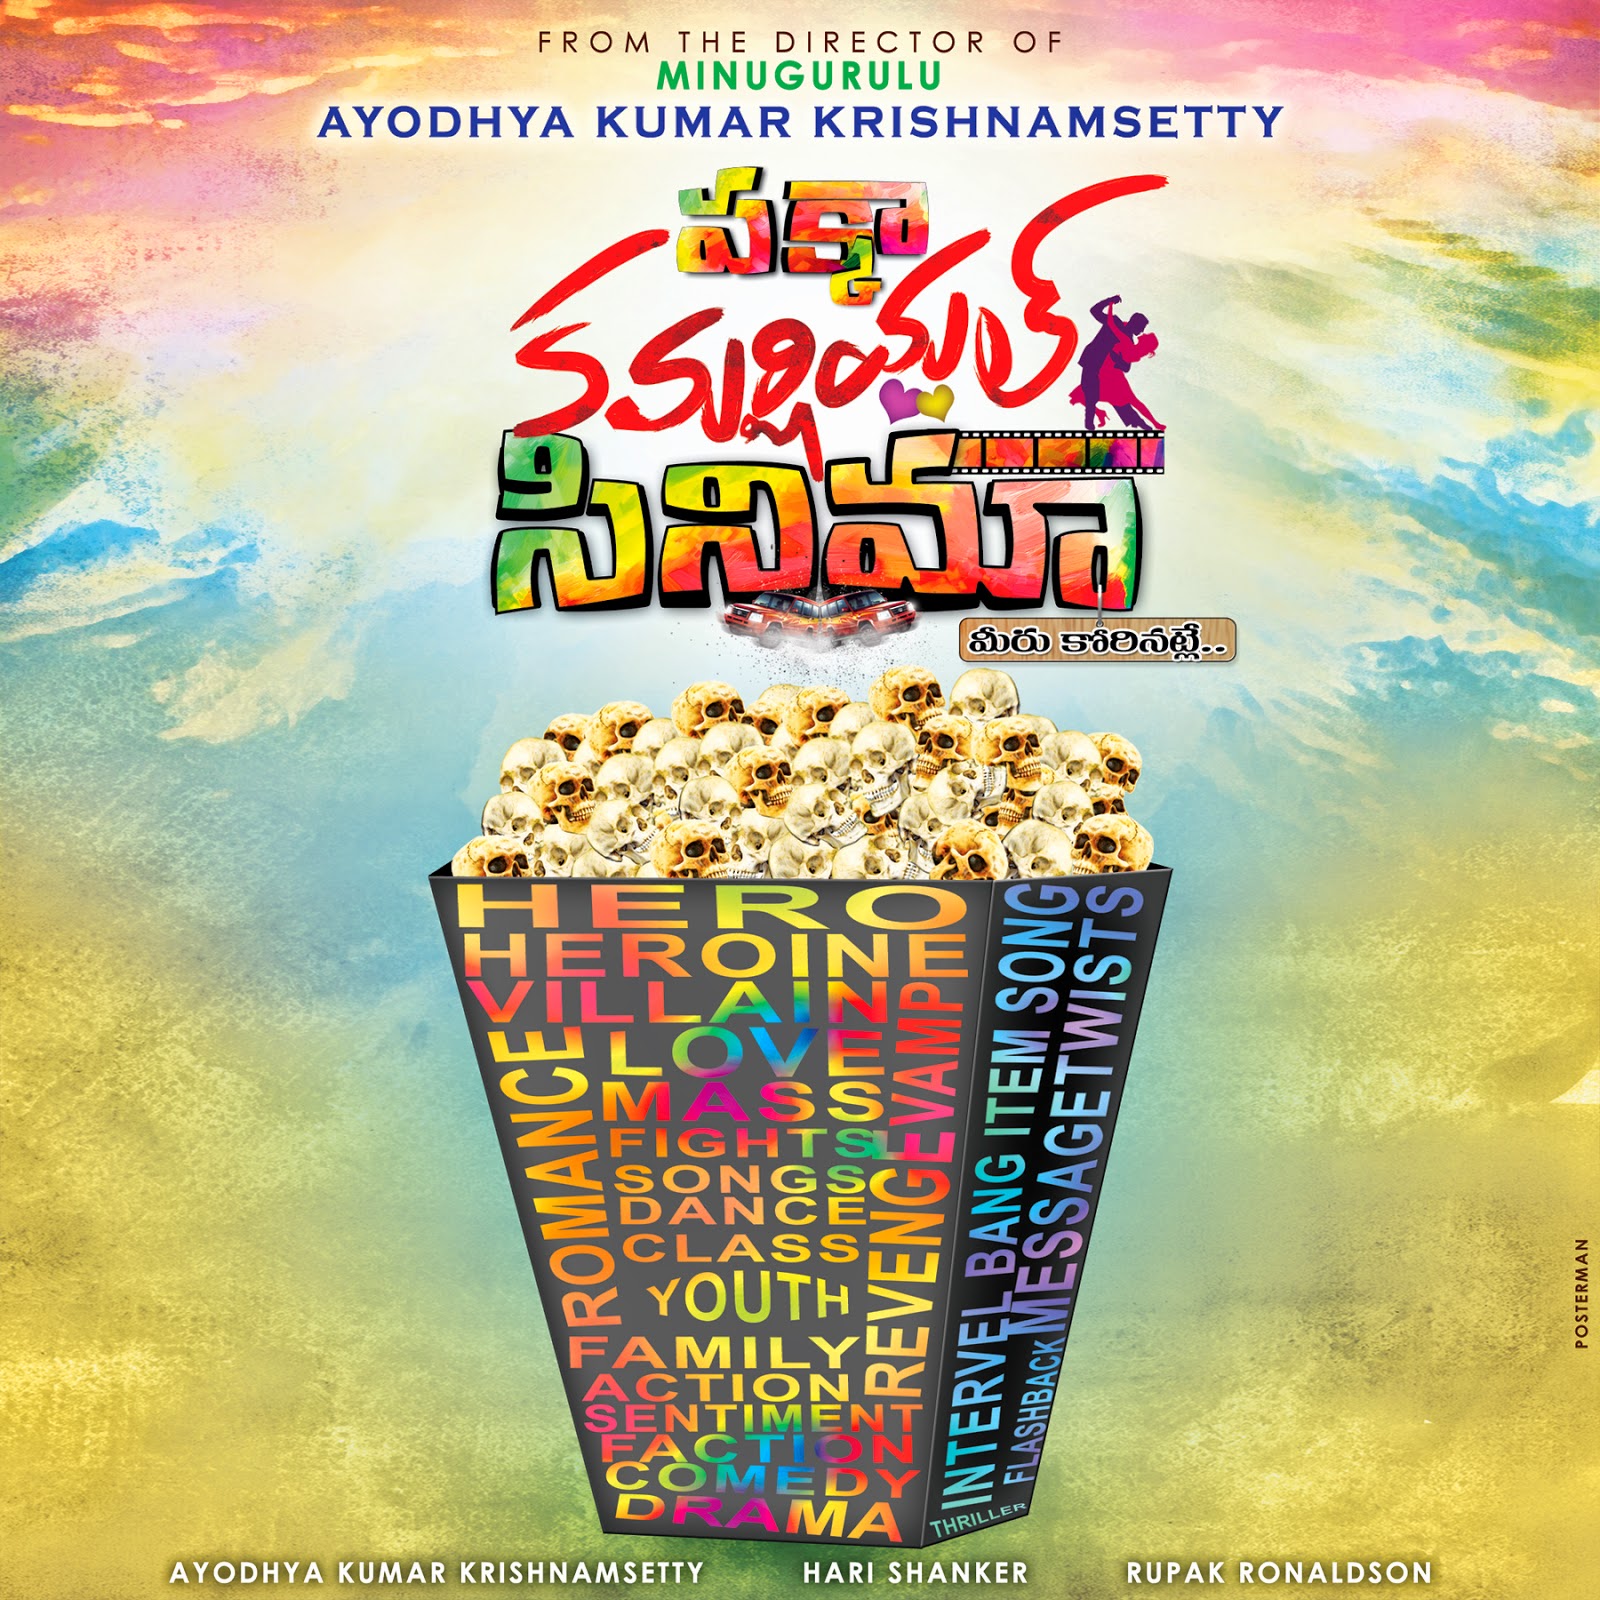 Pakka Commercial Cinema First look Poster